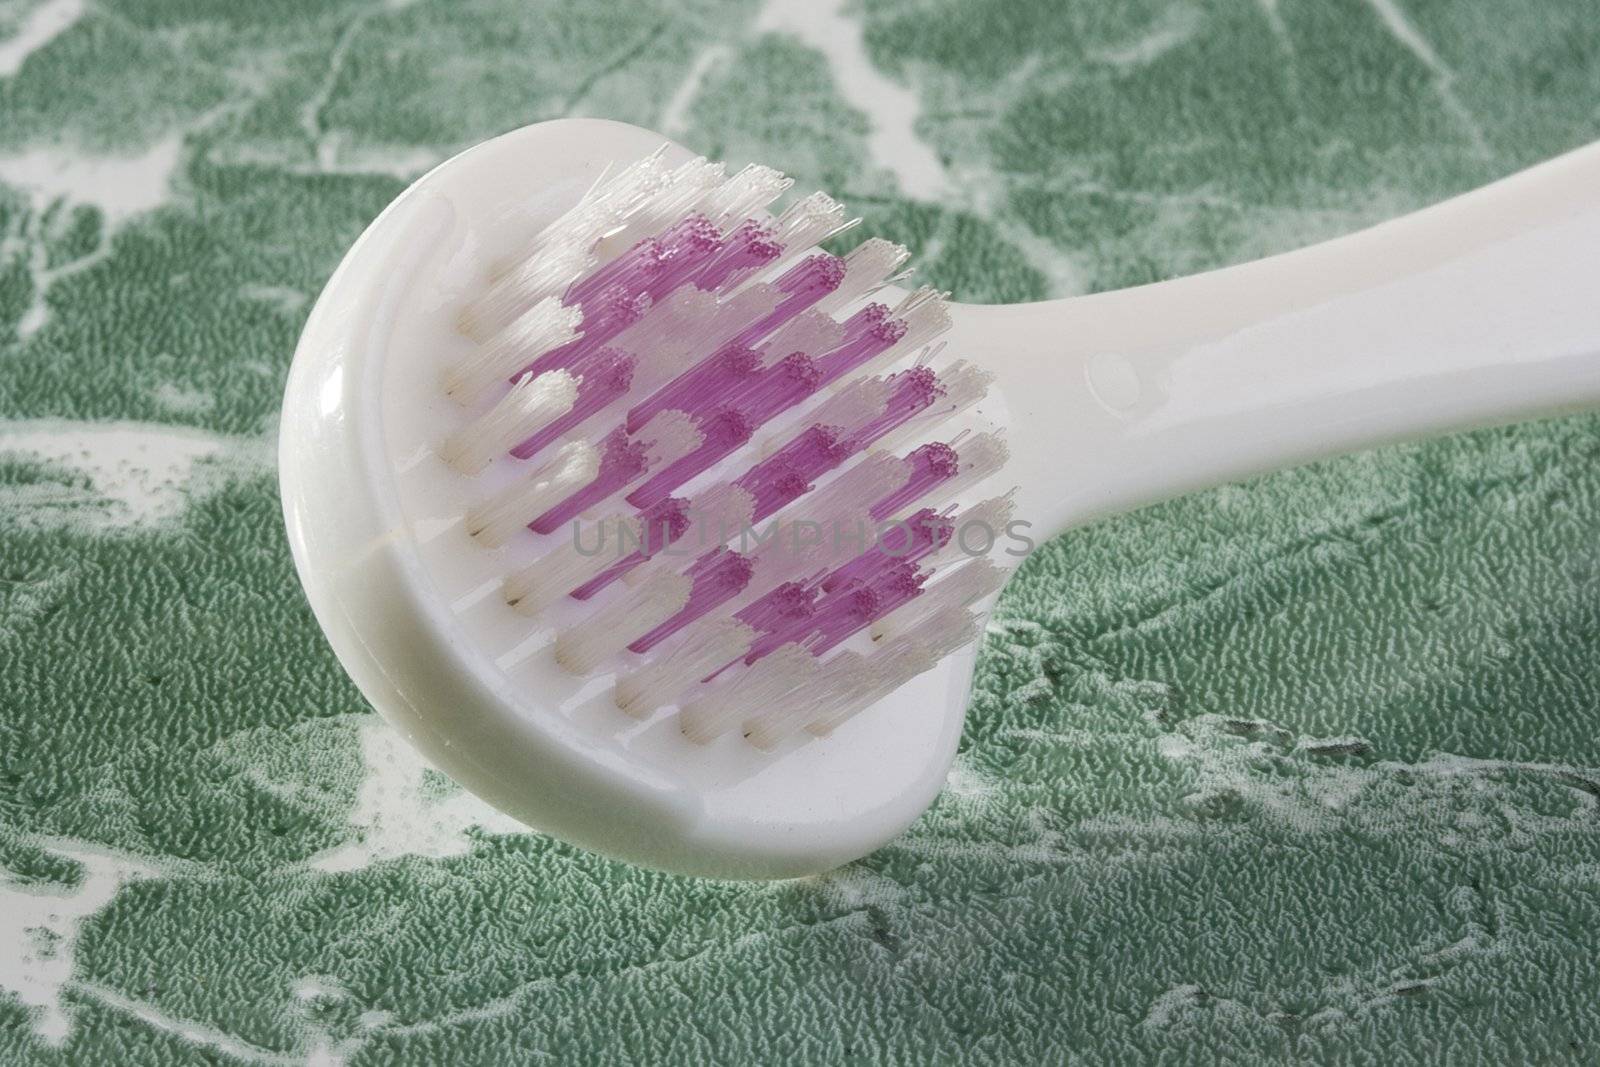 White tongue brush on the green countertop.